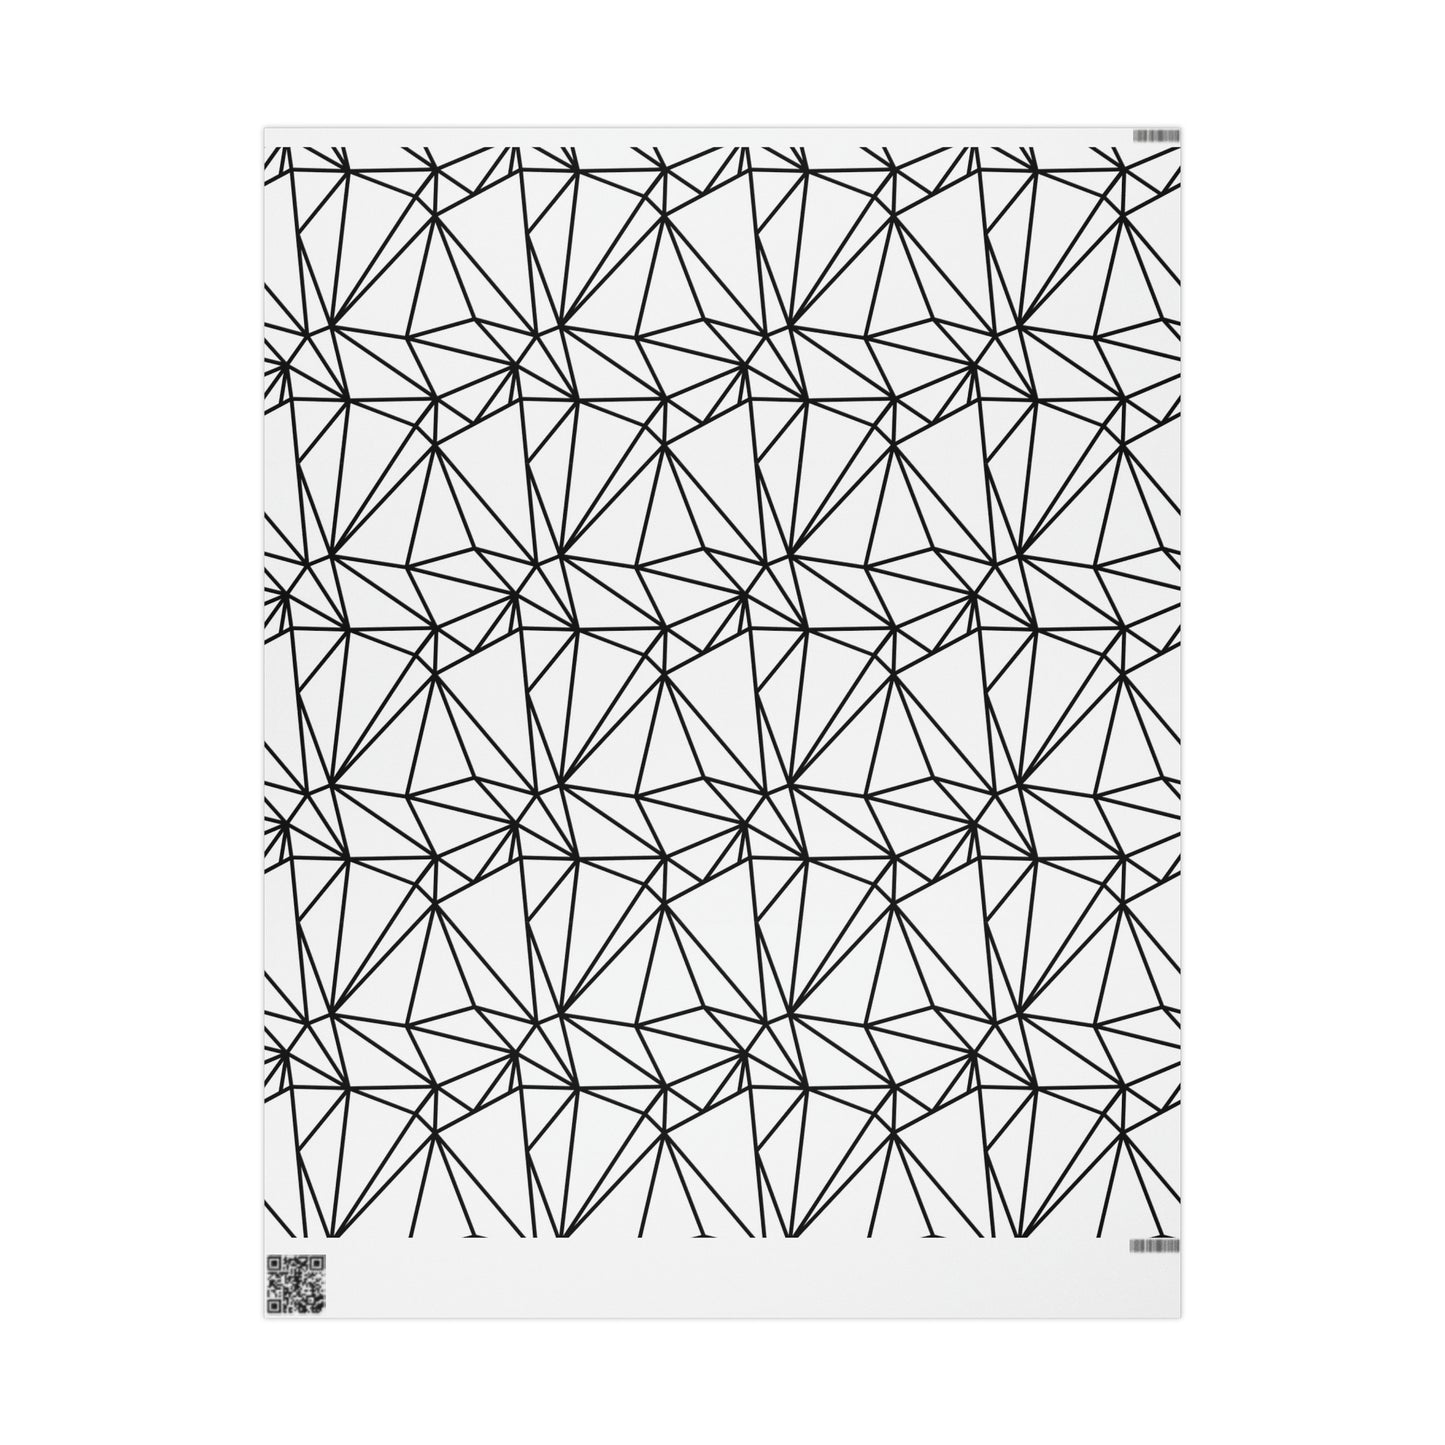 Black and White Poly Pattern Wrapping Paper for Gifts - Poly Shape Pattern Gift Wrap Paper